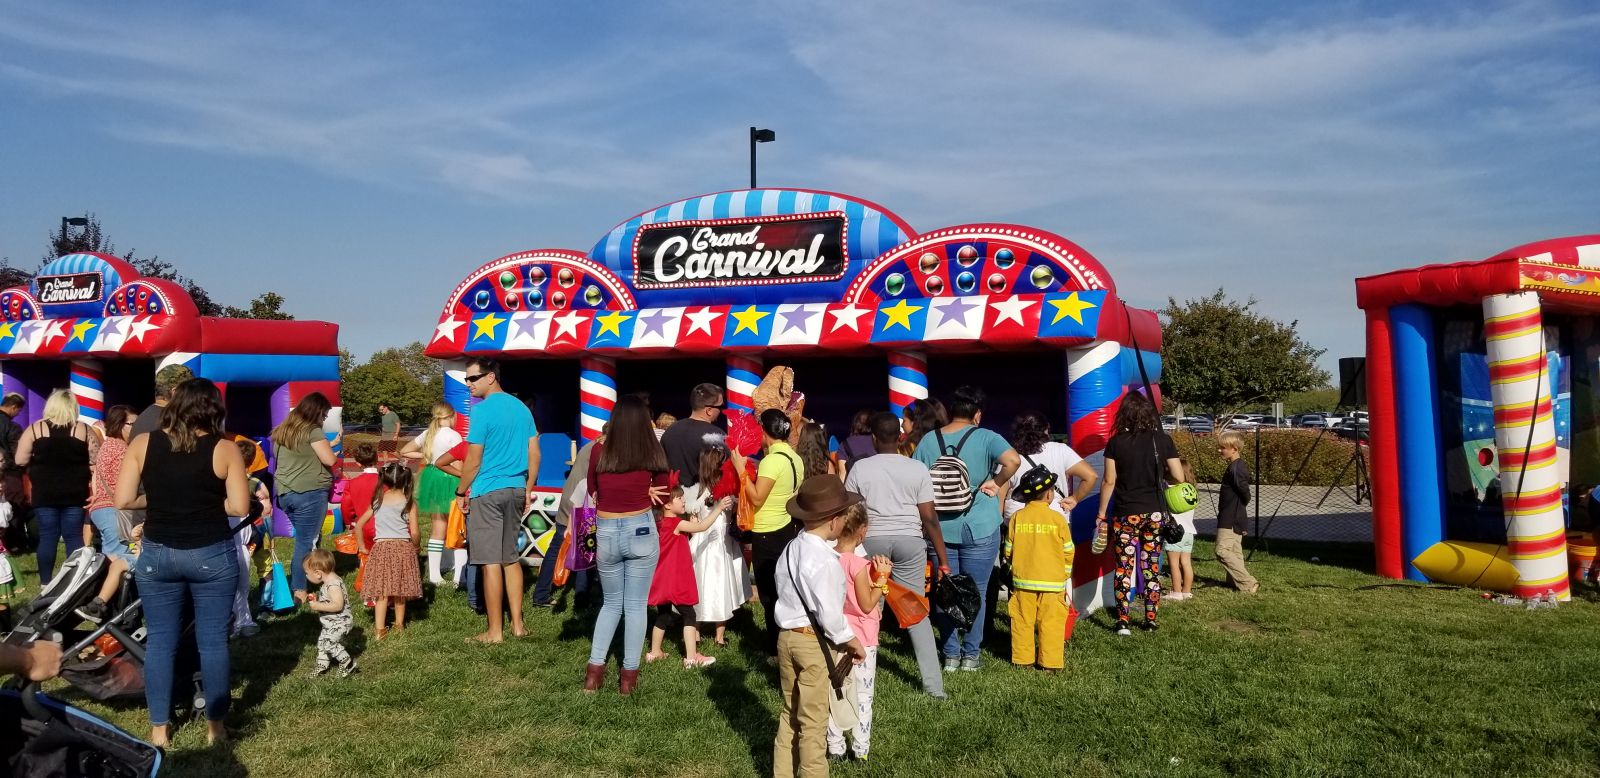 carnival-game-rentals-bay-area